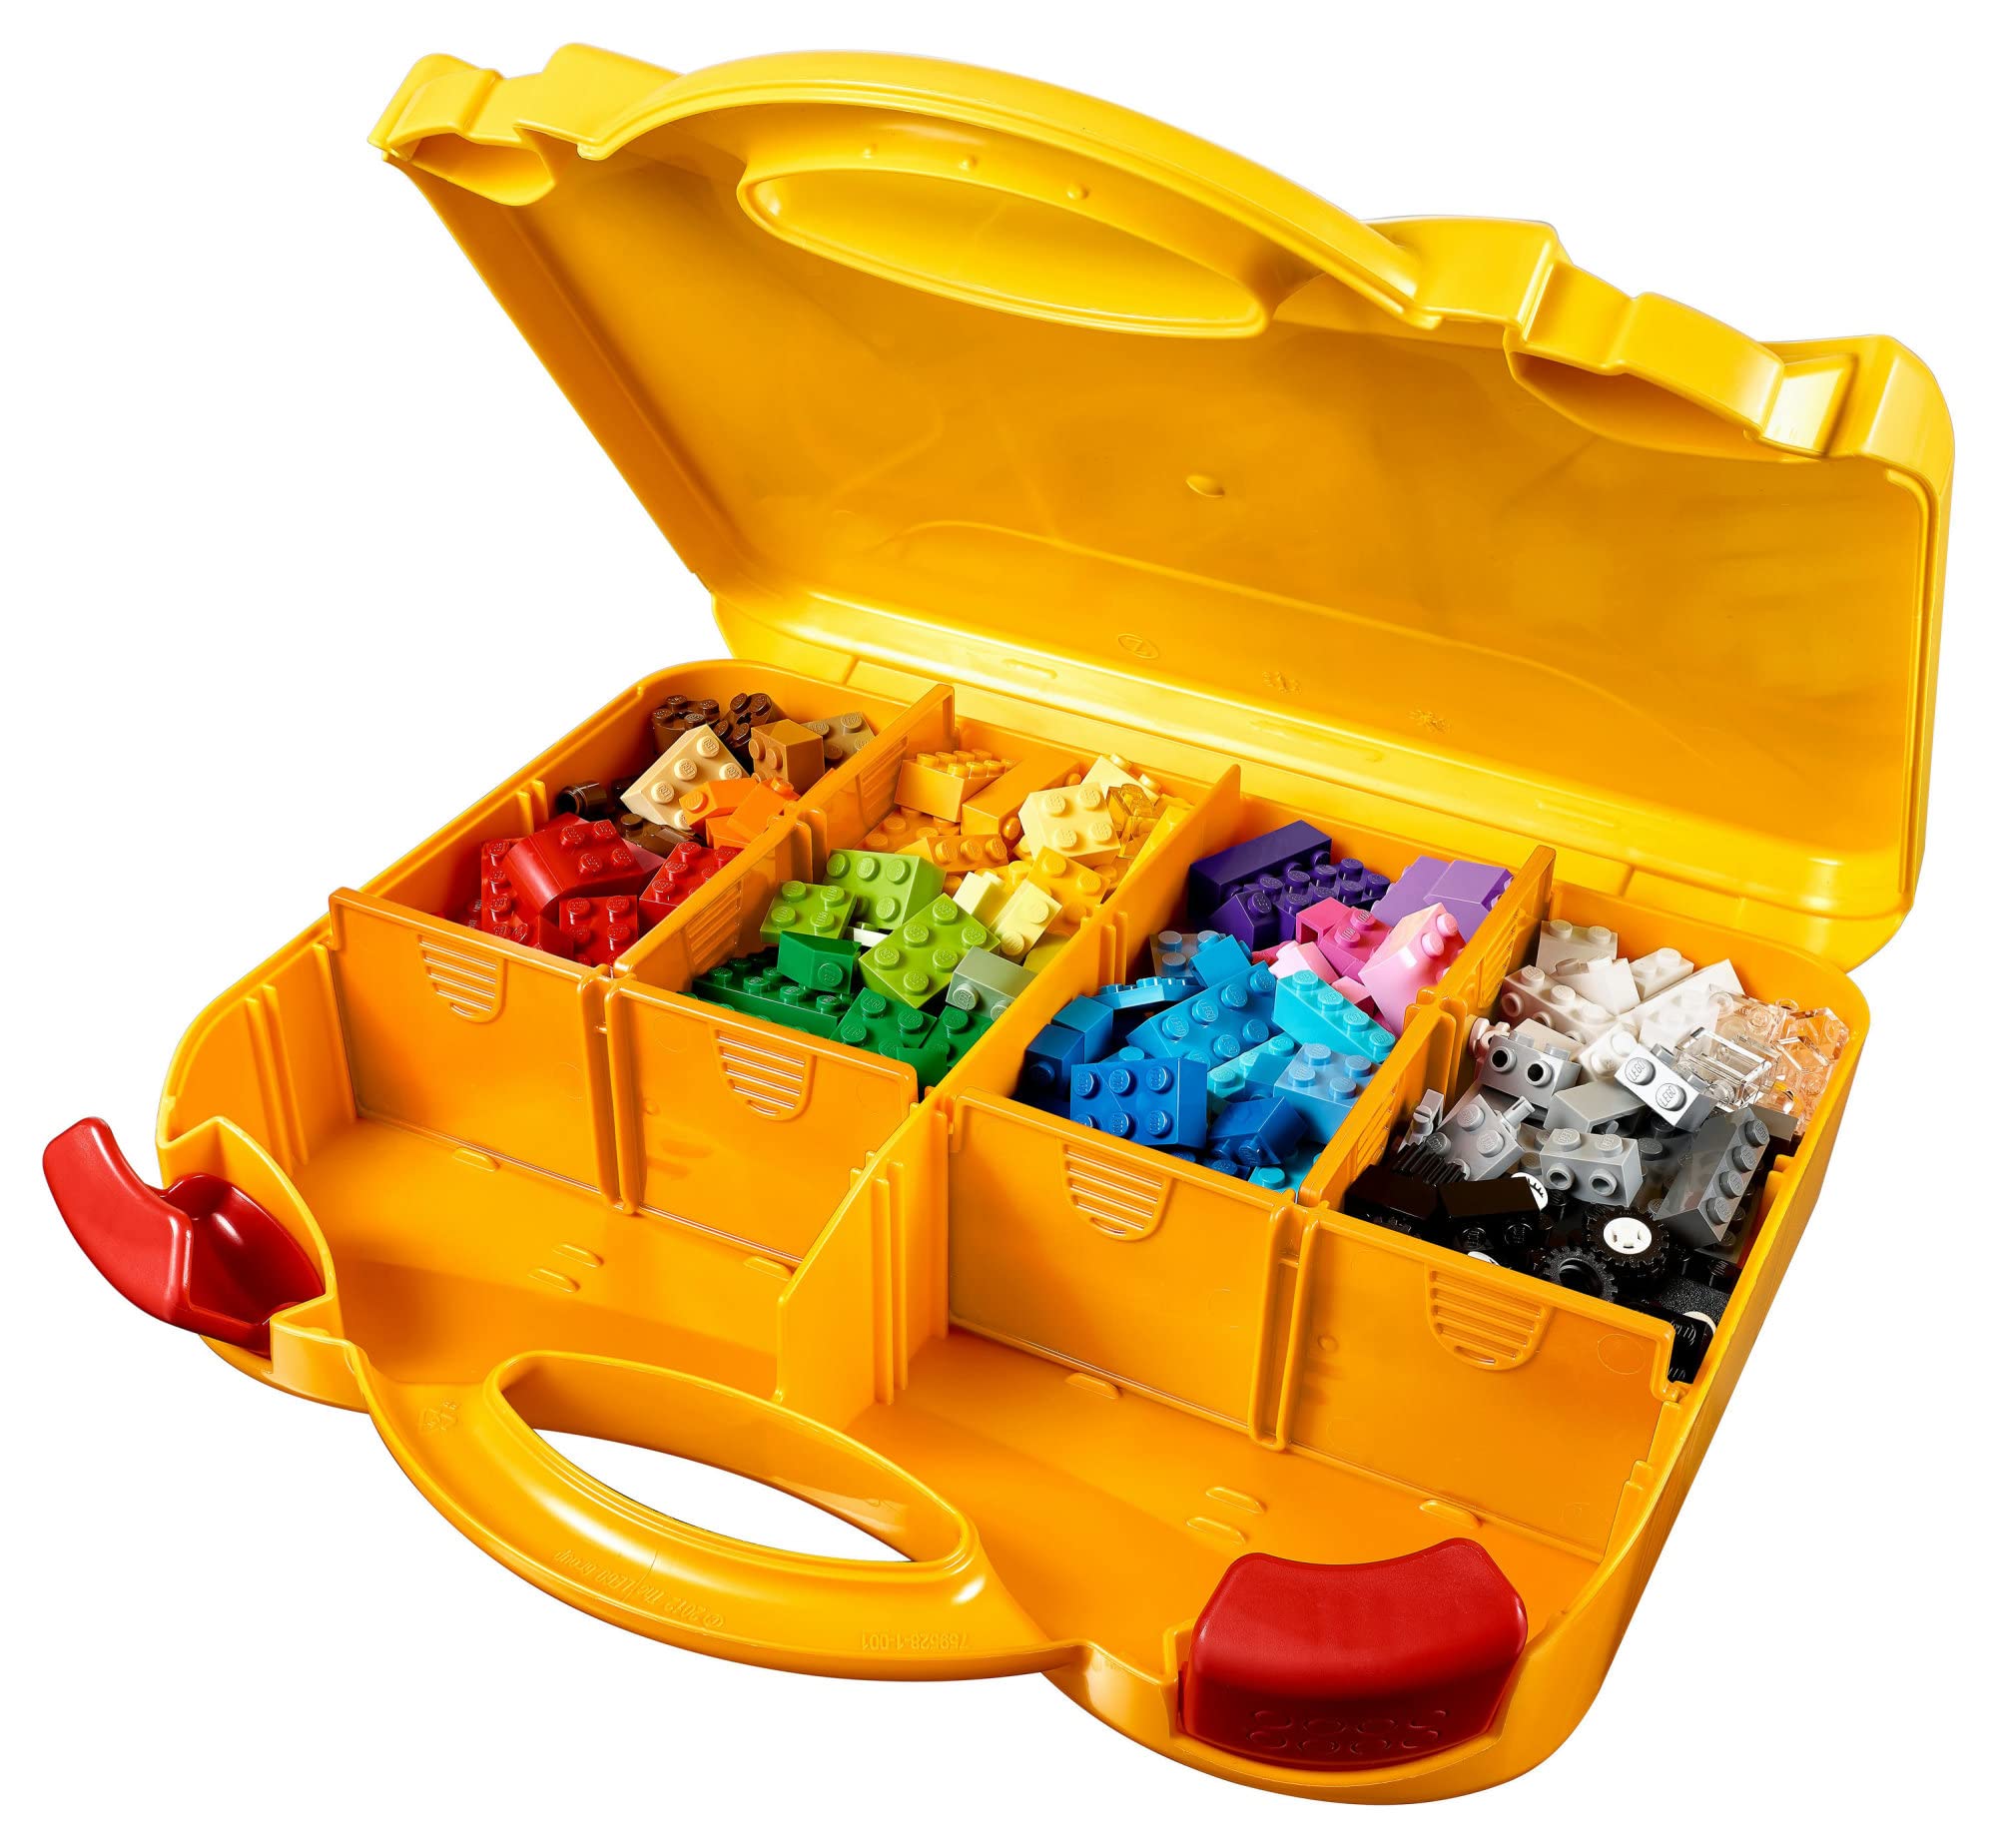 213-Piece LEGO Classic Creative Suitcase Building Kit (10713​) $13 + Free Shipping w/ Walmart+ or $35+